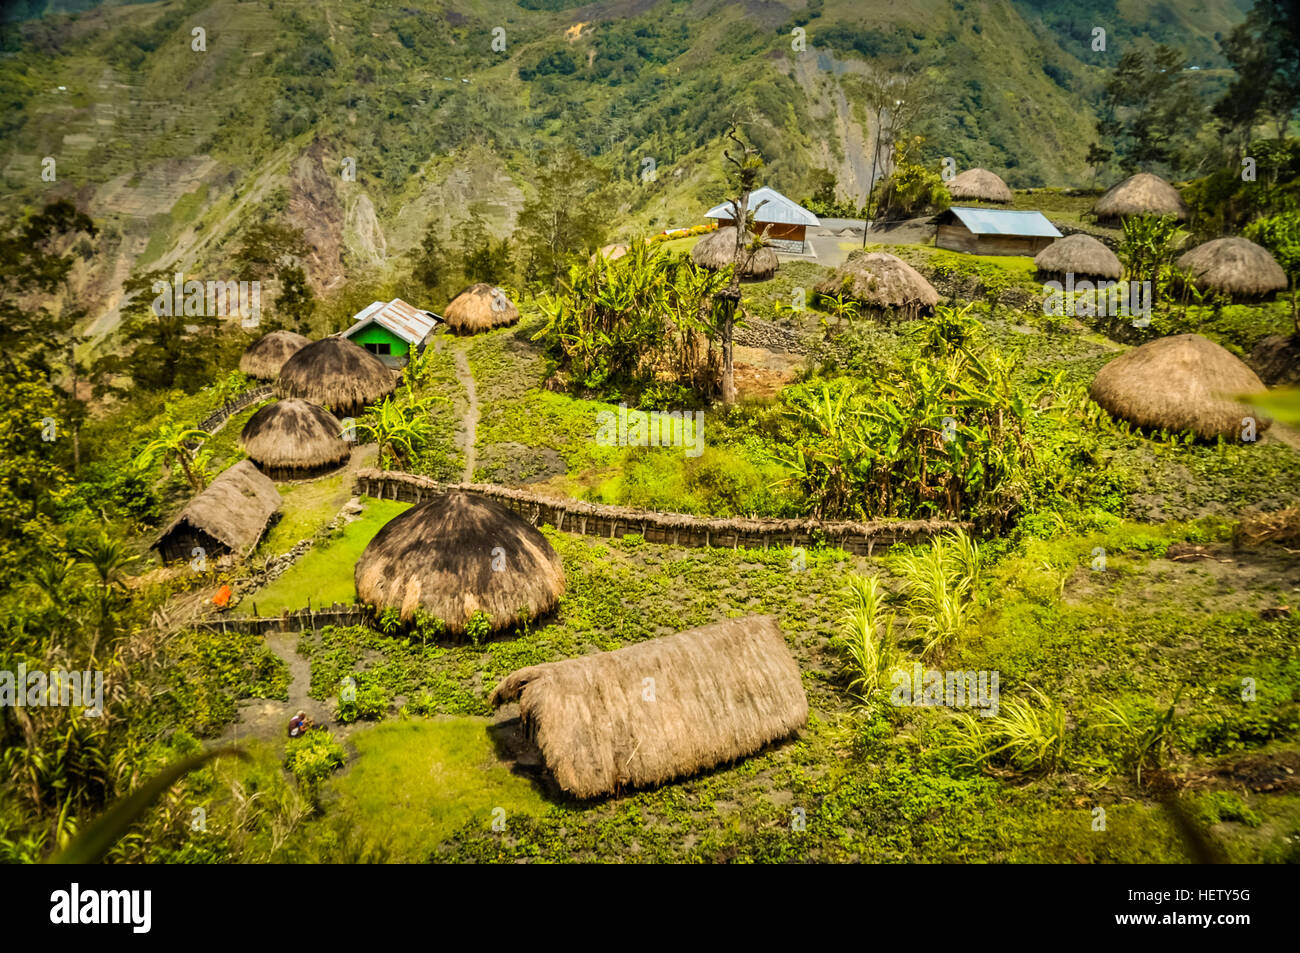 Photo of traditional village houses with straw roofs in village surrounded by high mountains in Dani circuit near Wamena, Papua, Indonesia. Stock Photo